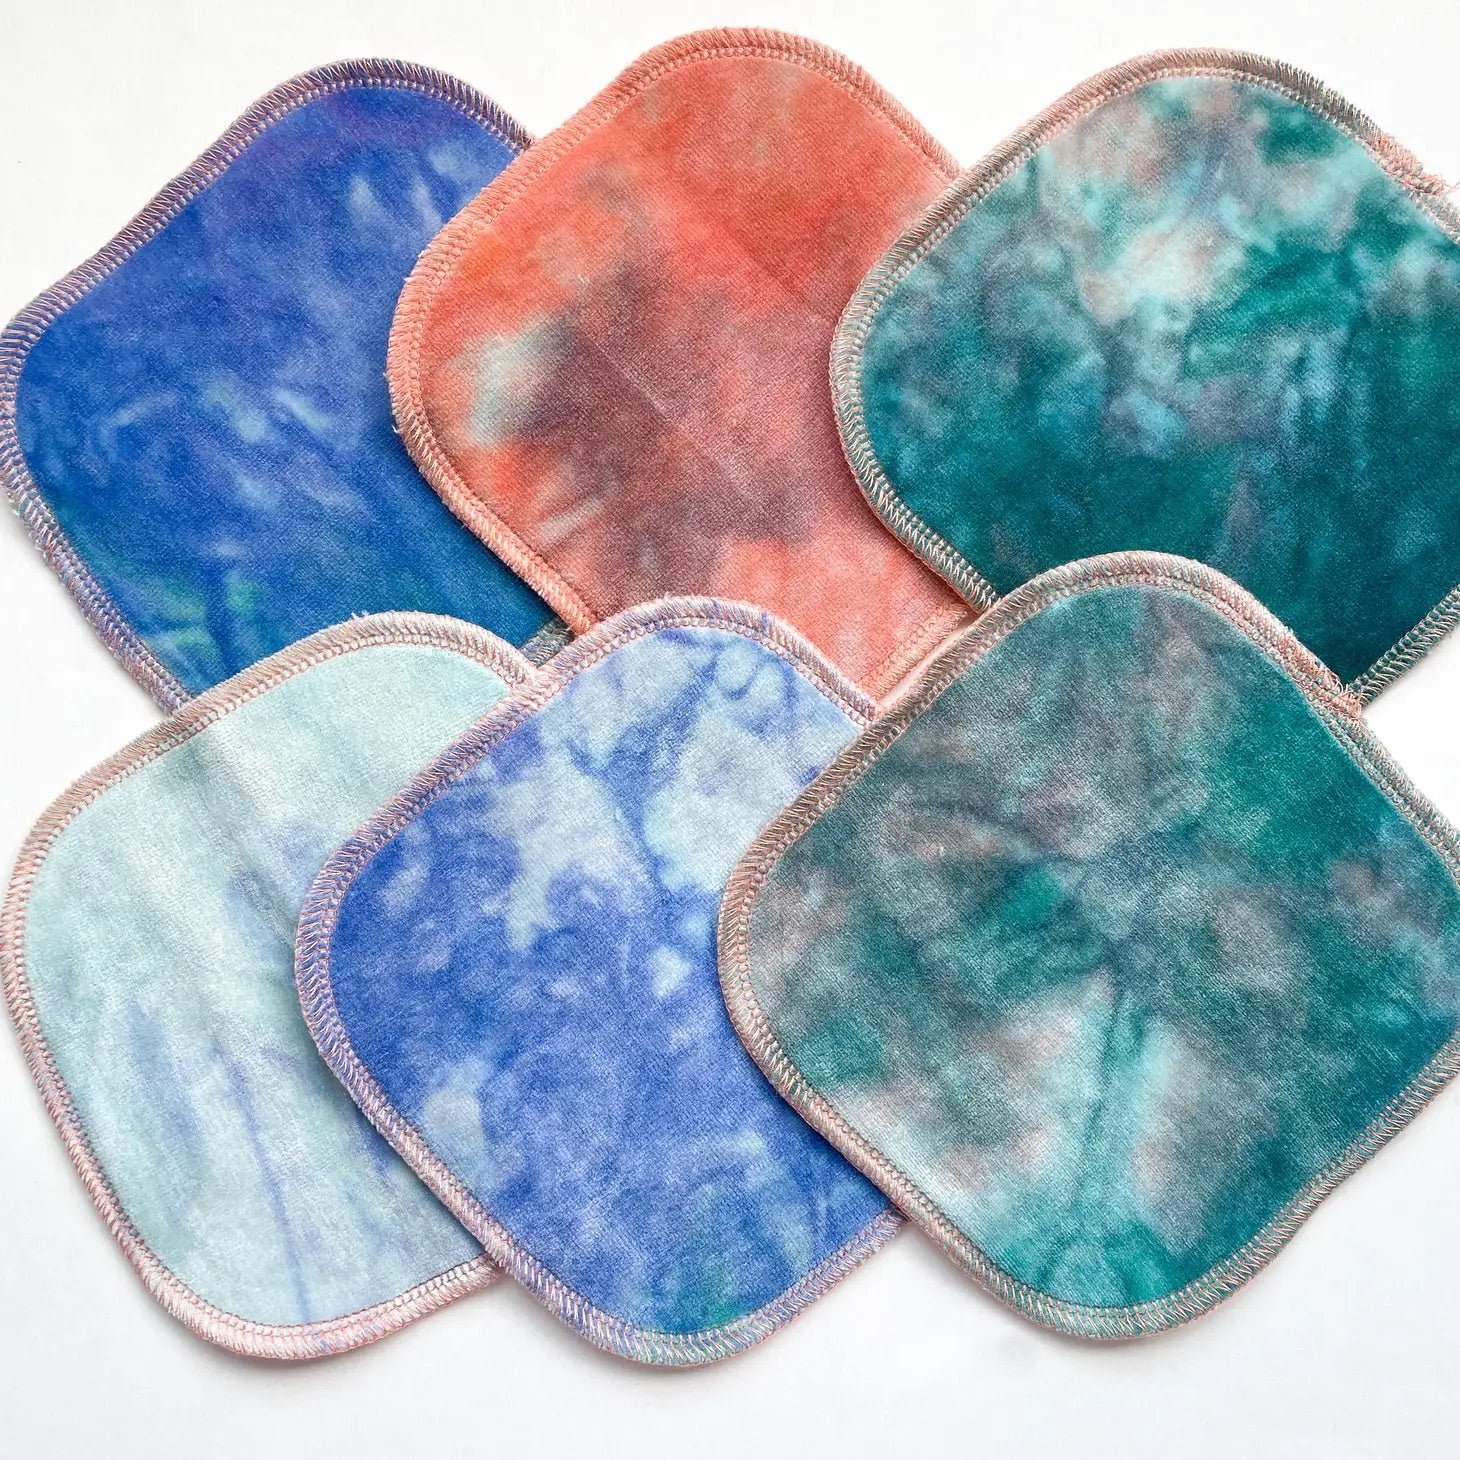 hand-dyed organic wipes in unicorn